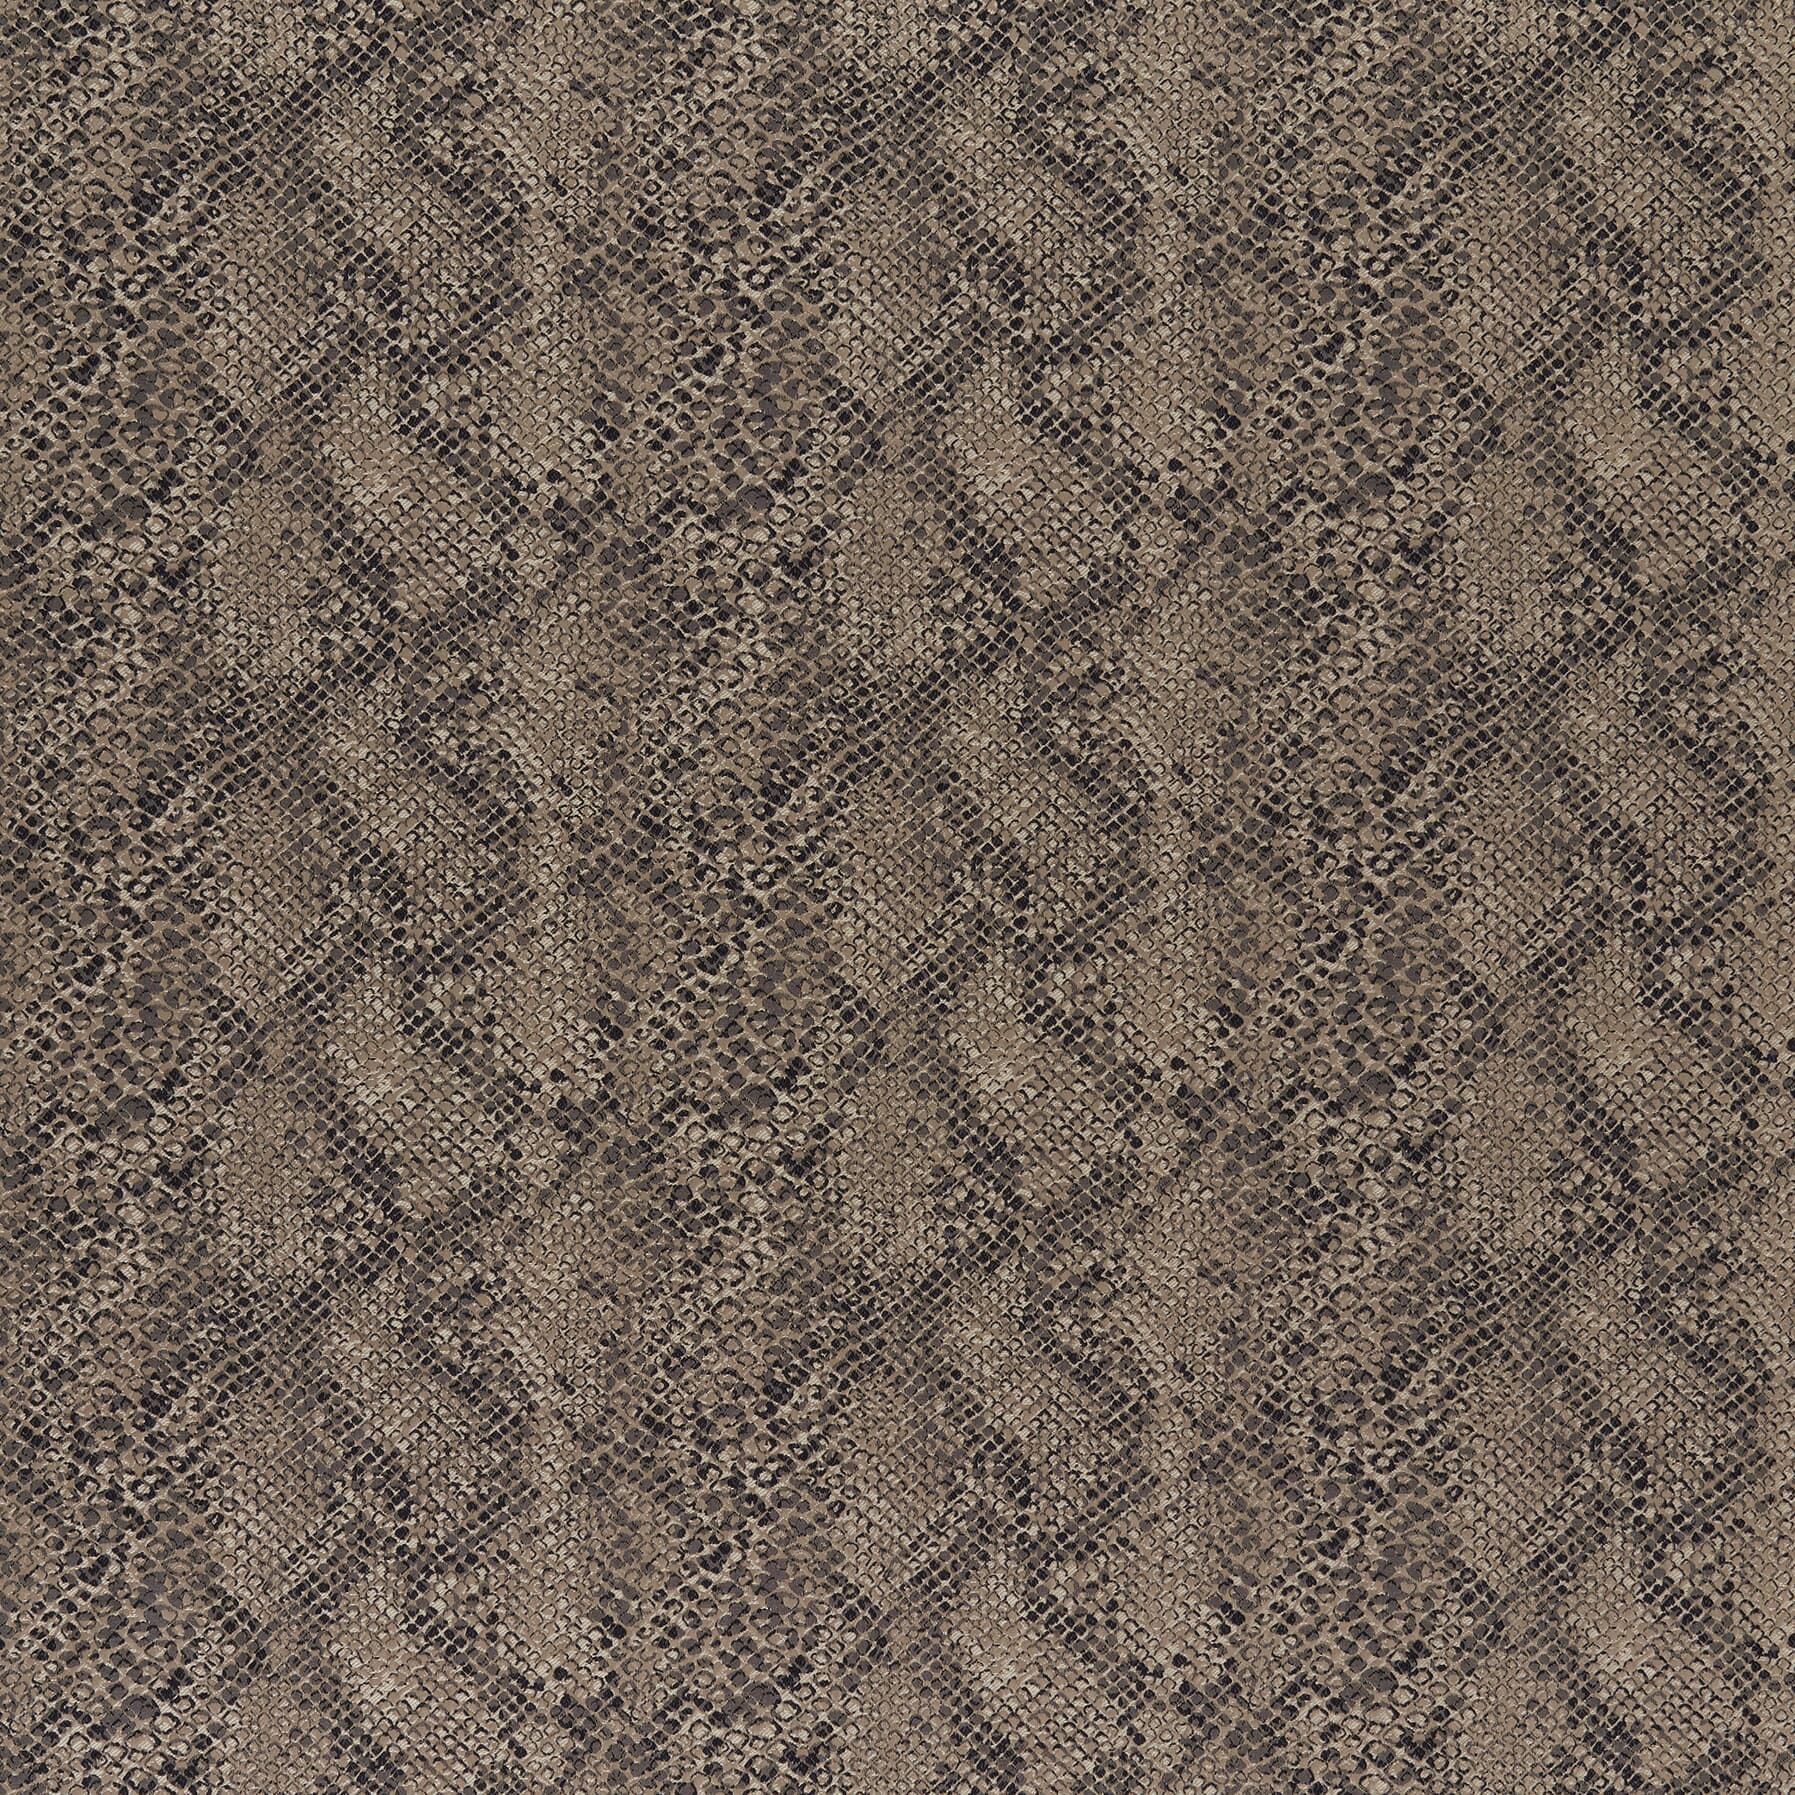 Adcott 2 Toffee by Stout Fabric